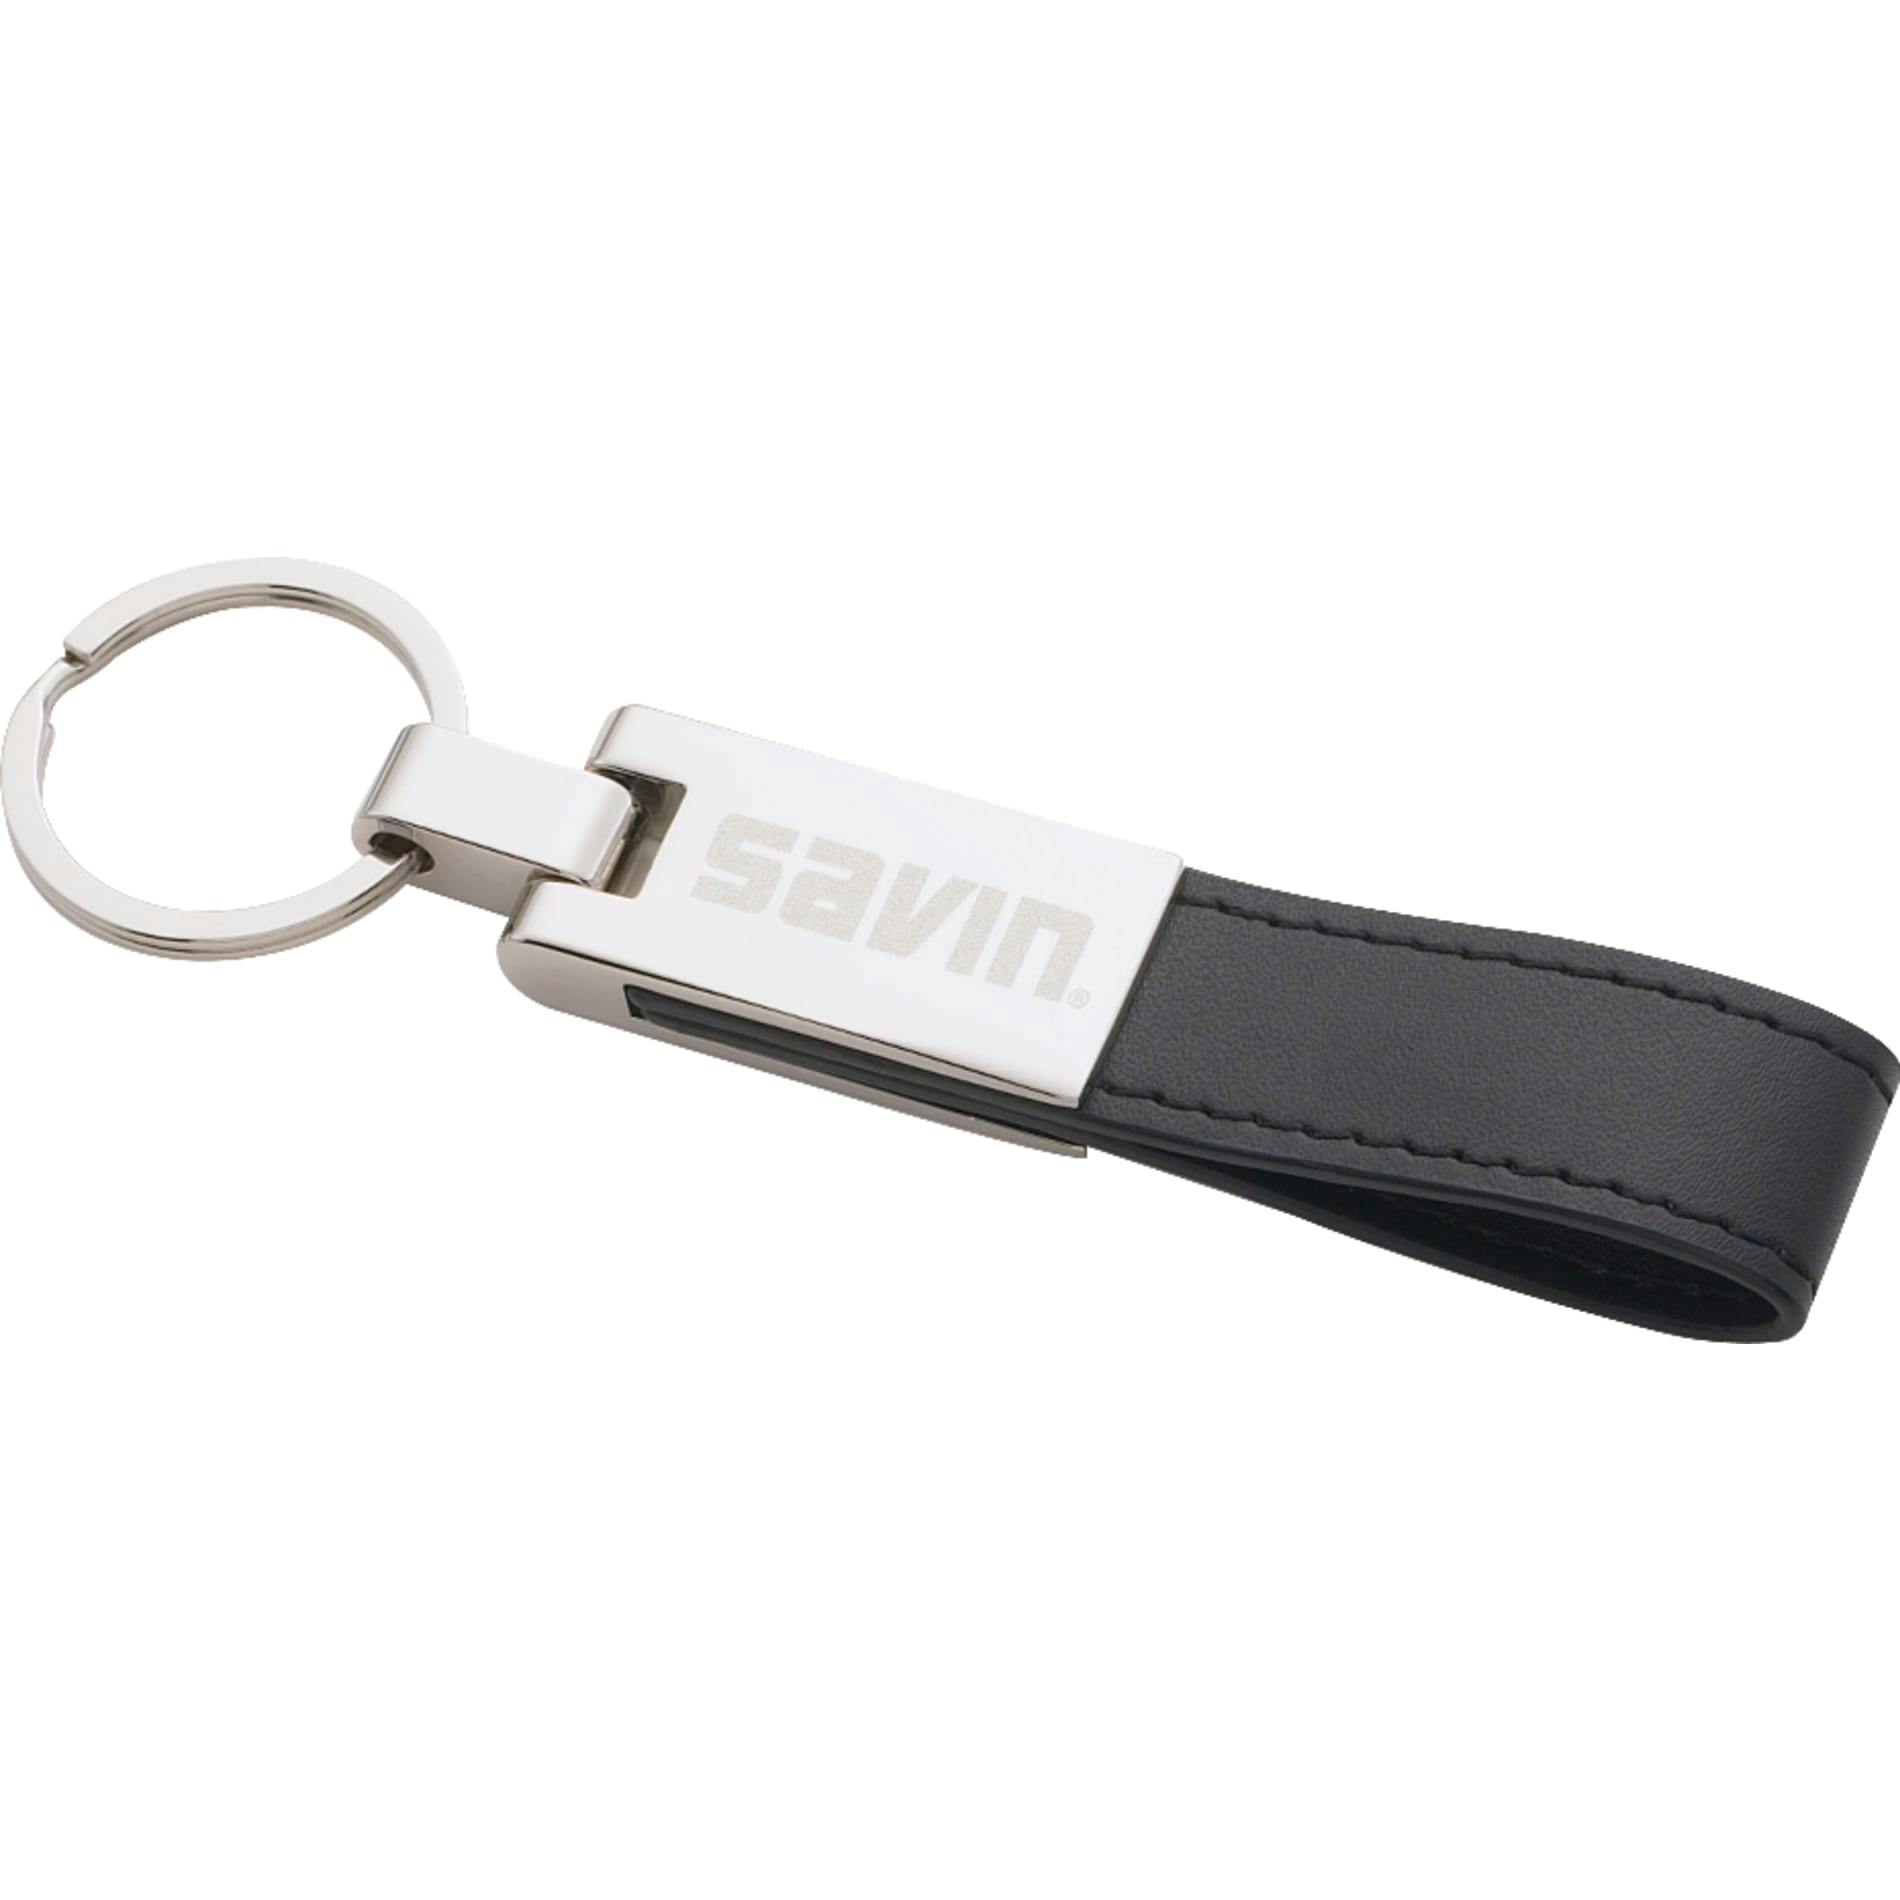 UltraHyde Silver Key Ring - additional Image 1